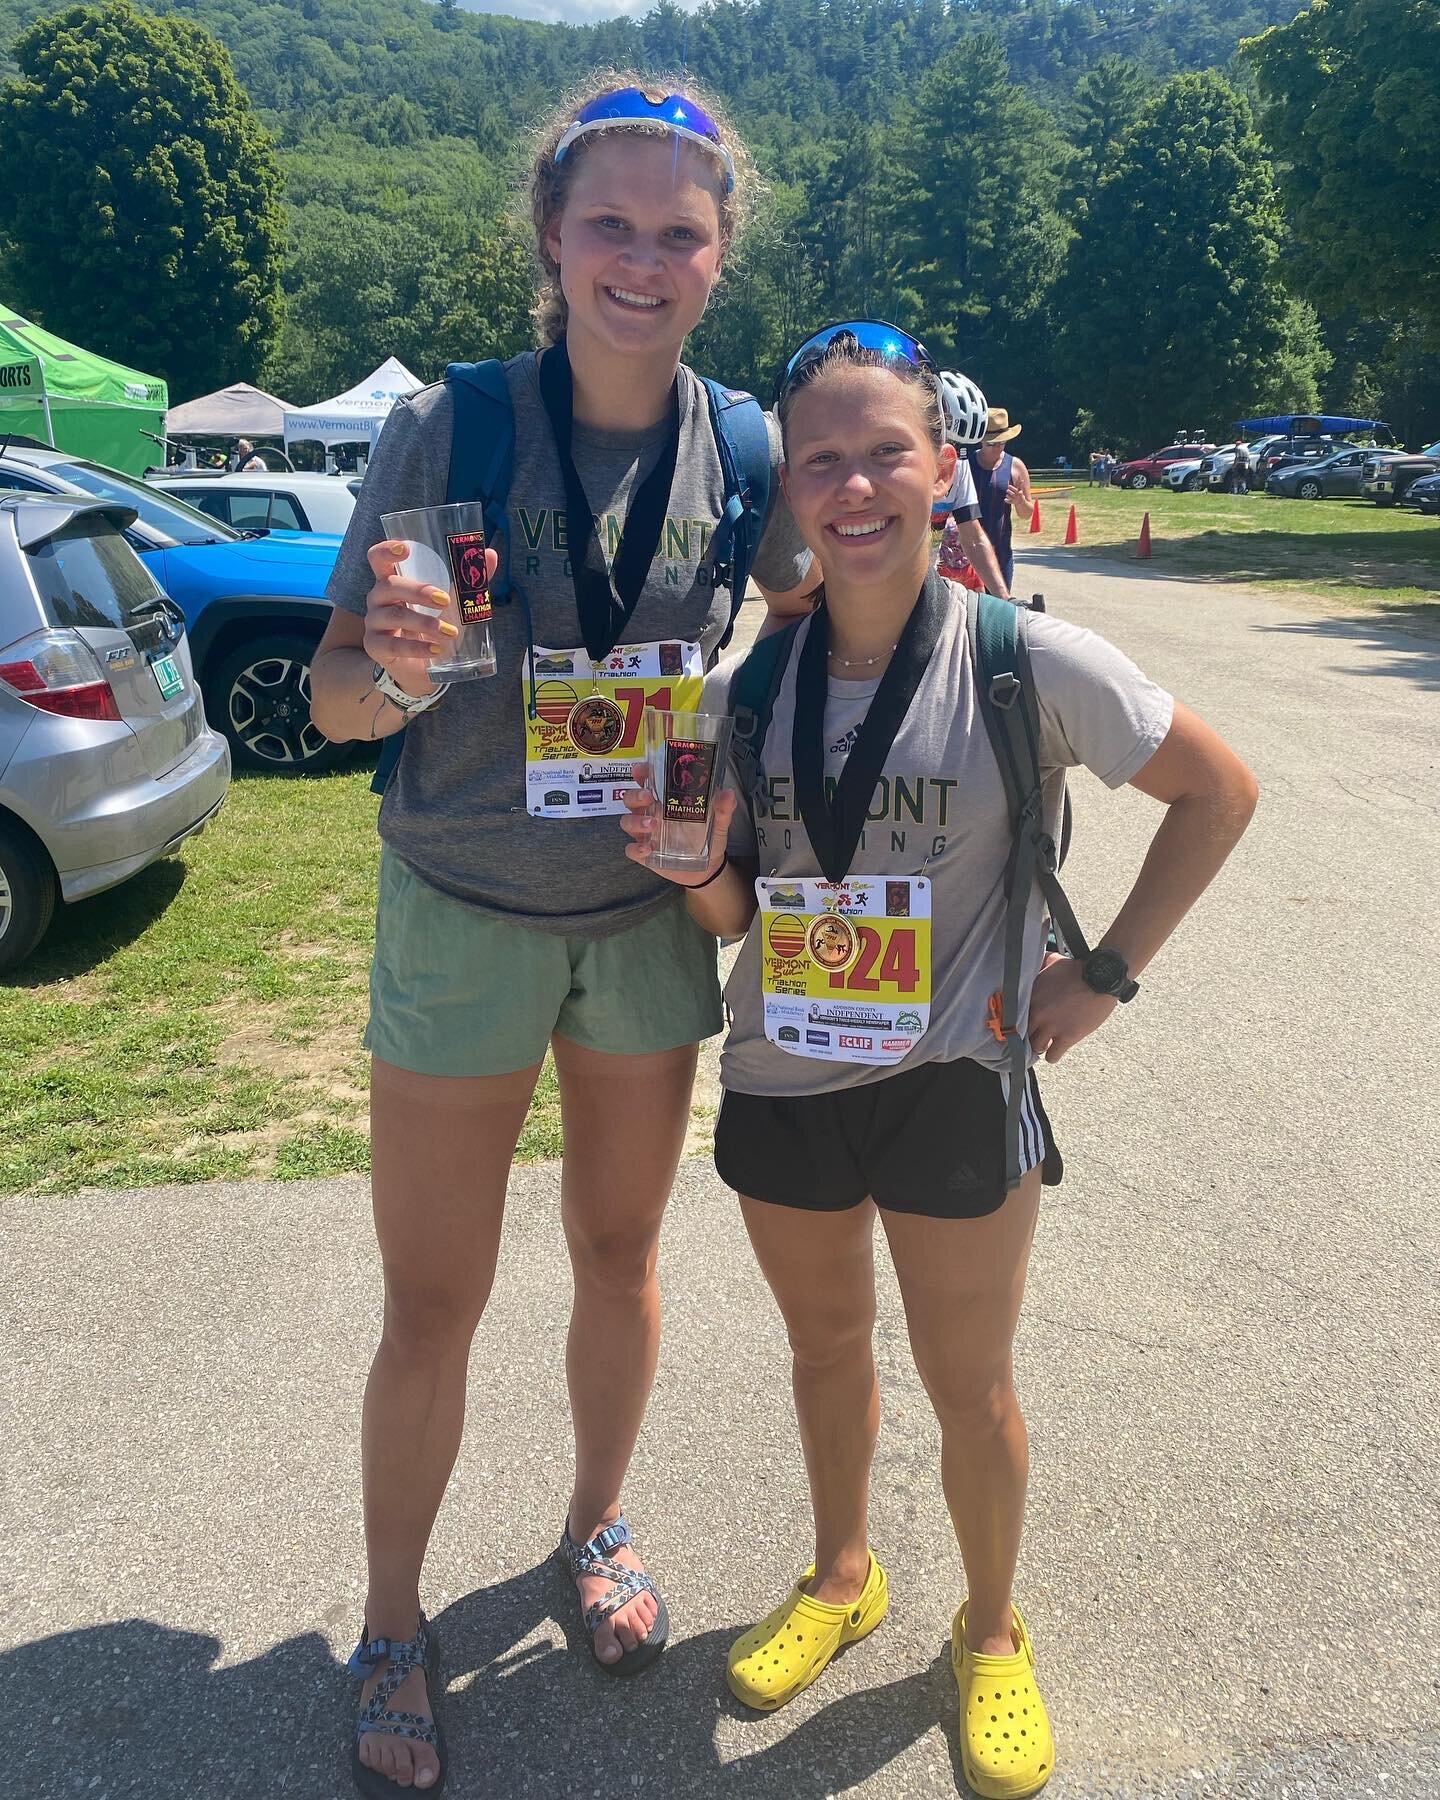 What is Vermont Rowing doing this summer?

Rising seniors Megan and Christina attended the Vermont Sun Triathlon in Lake Dunmore last week! They completed a total of a 600 yard swim, a 14 mile bike and a 3.1 mile run. Congratulations to two very impr